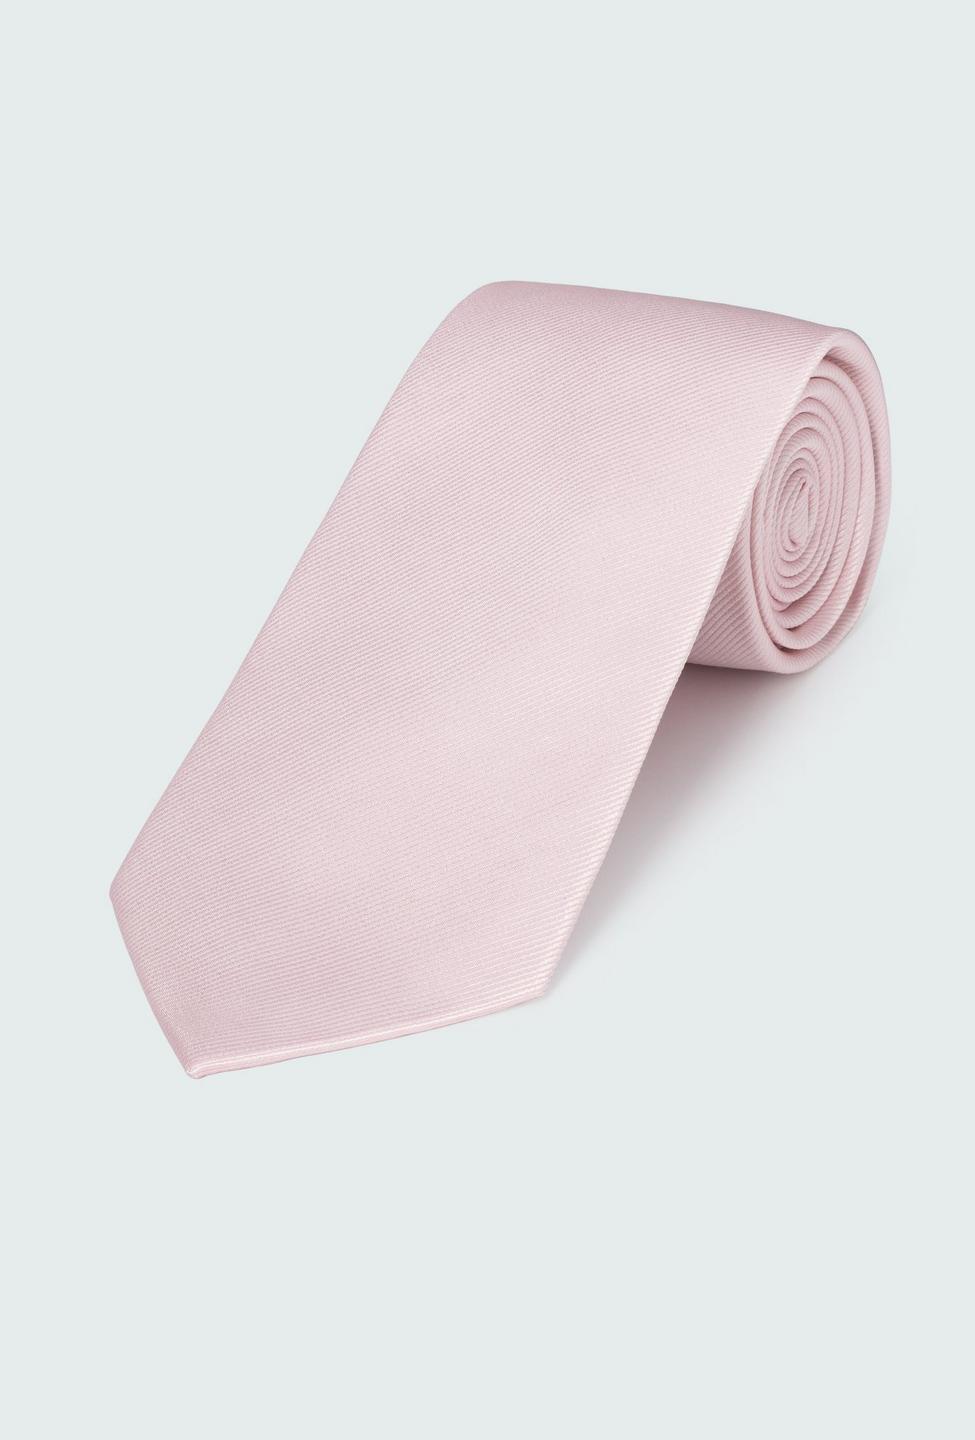 Pink tie - Solid Design from Indochino Collection